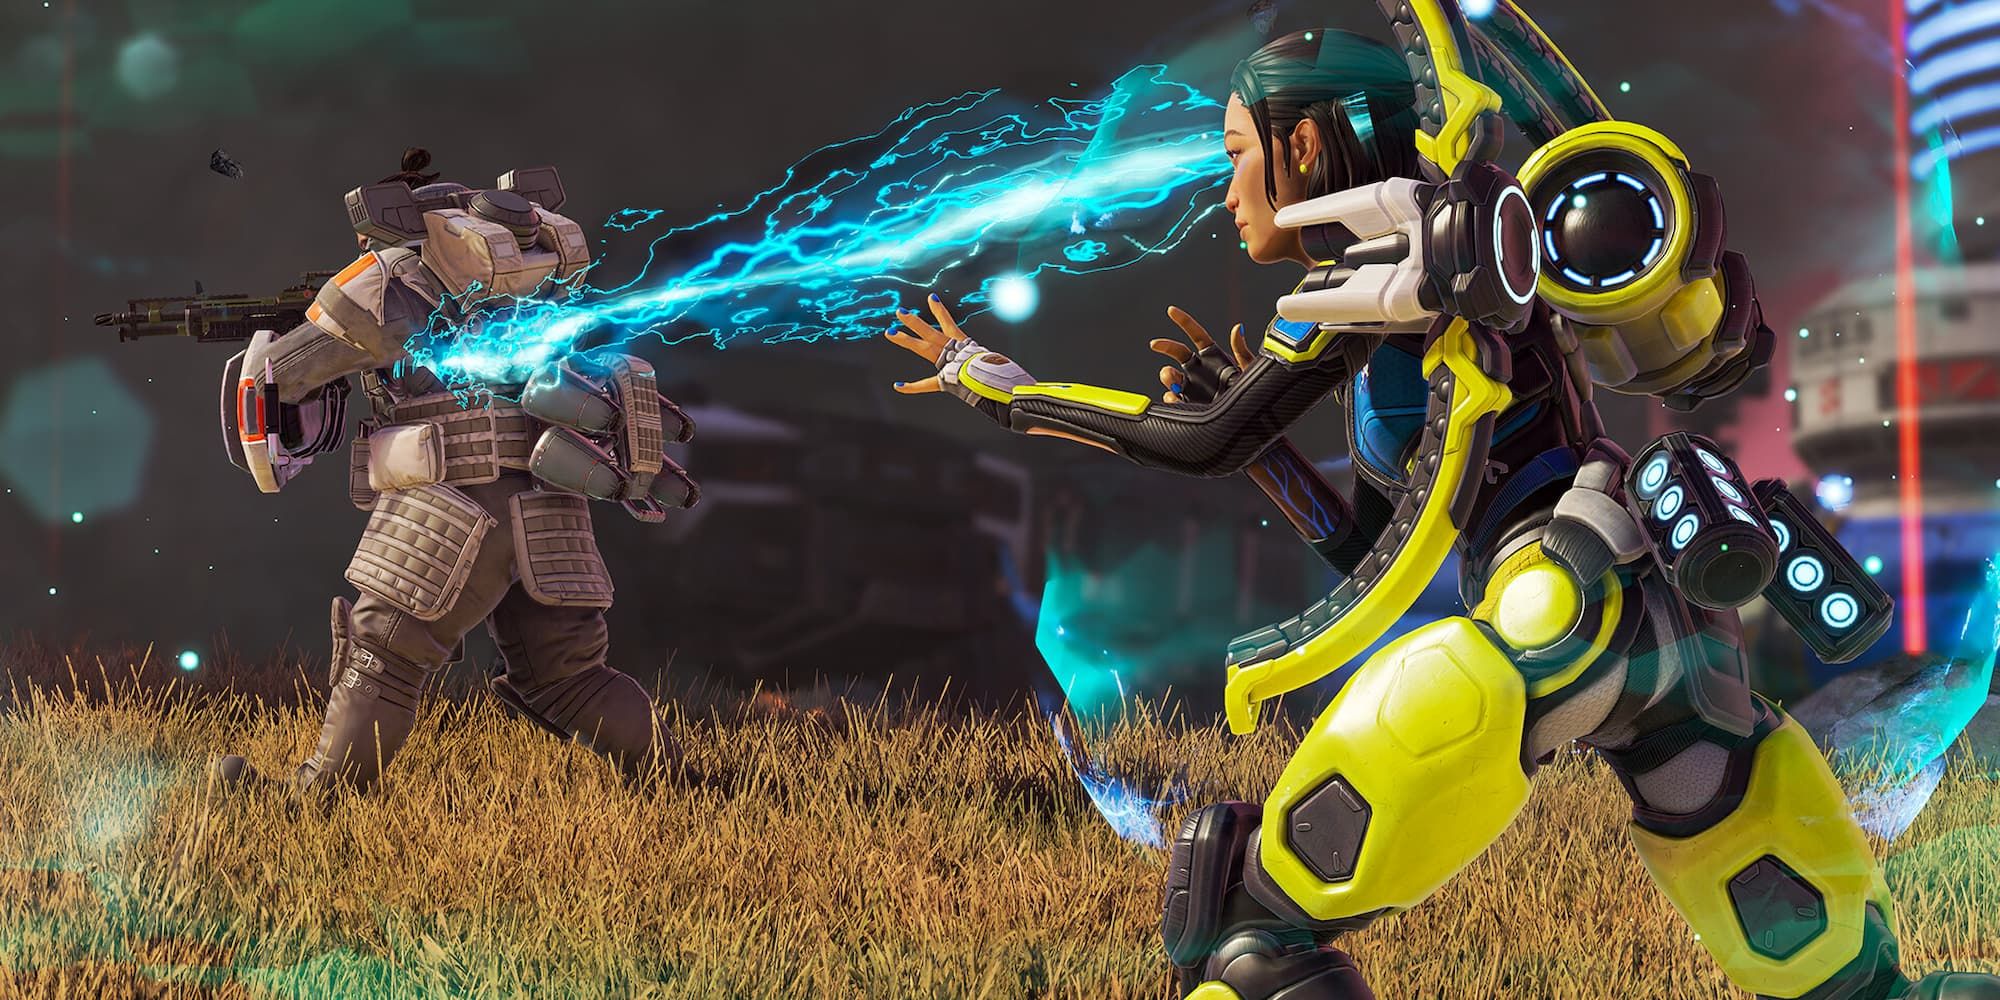 Apex Legends game director on cross-progression: “We want to do it